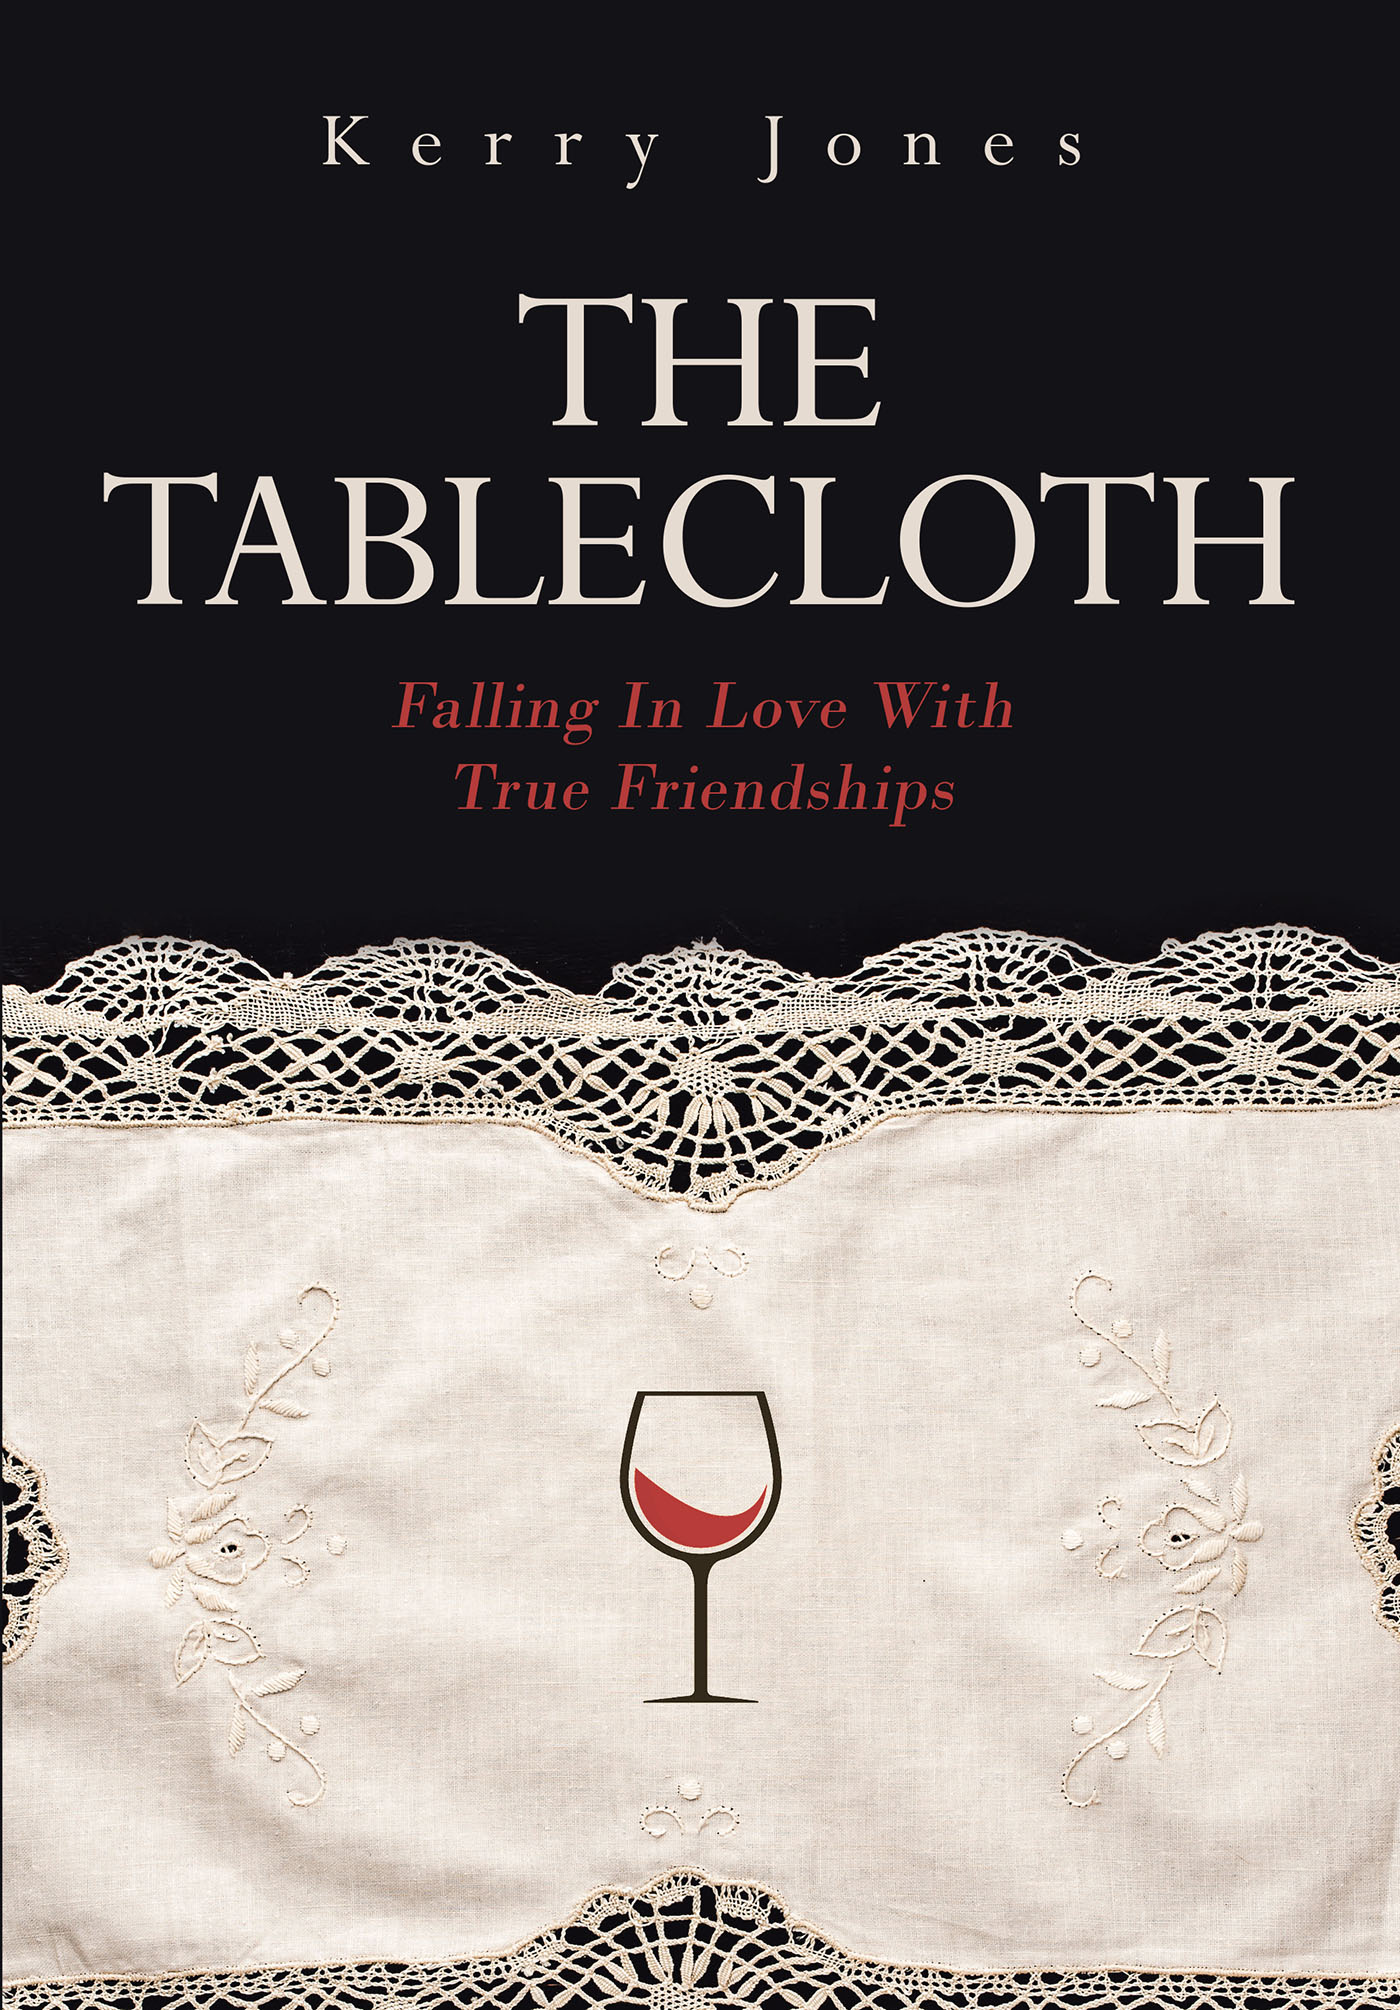 Author Kerry Jones’s New Book, “THE TABLECLOTH: Falling In Love With True Friendships,” Follows BJ Slone Who is Always "Moving It and Doing It" in Life